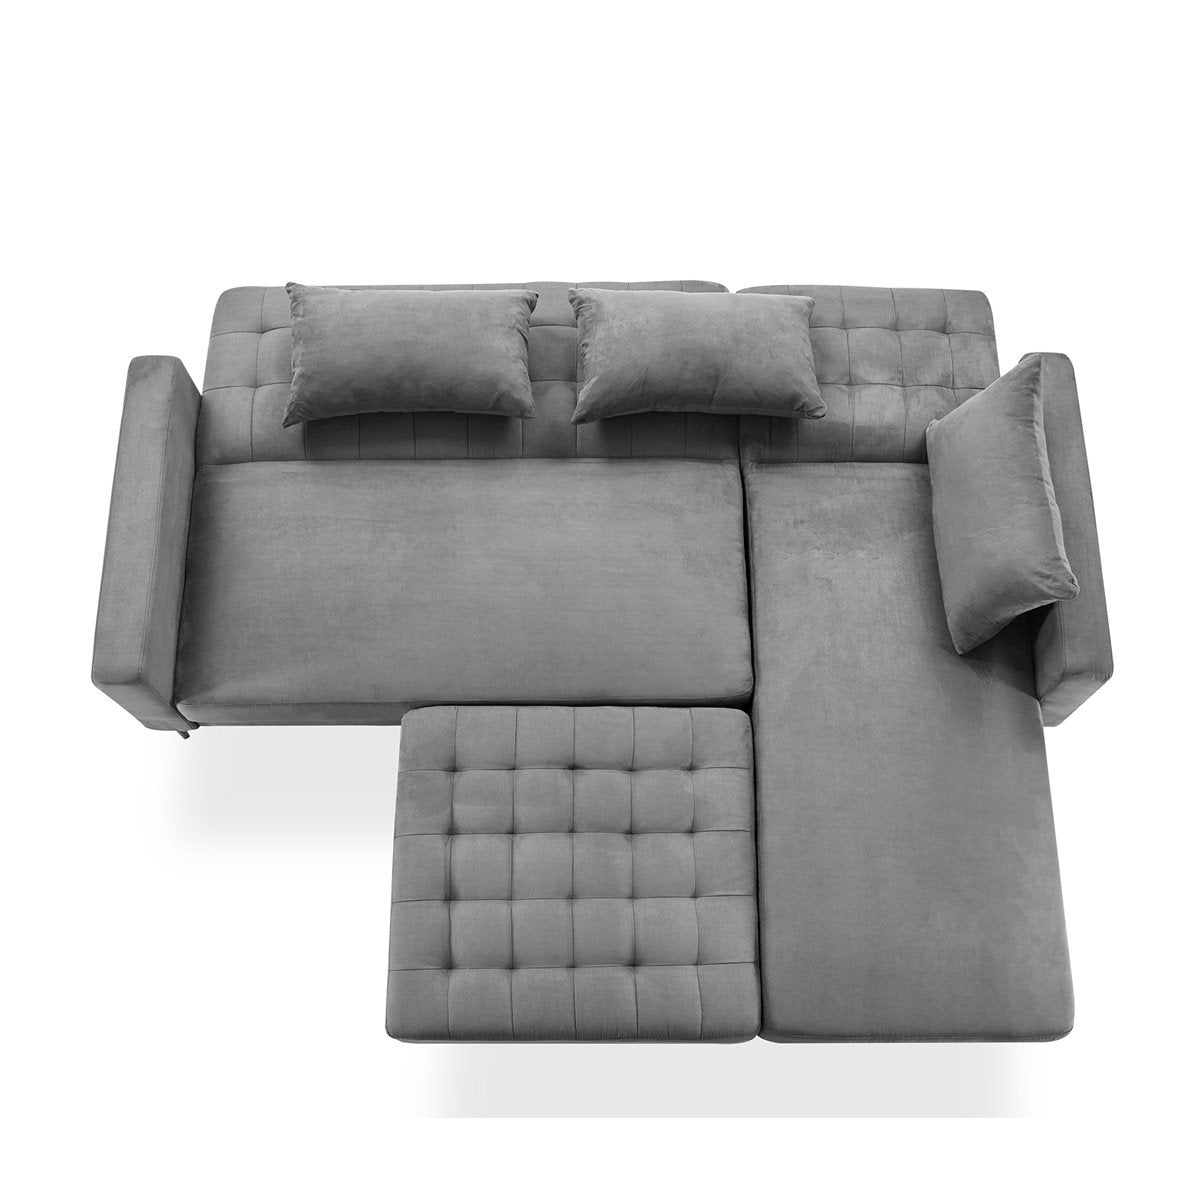 Upholstered Sofa Bed